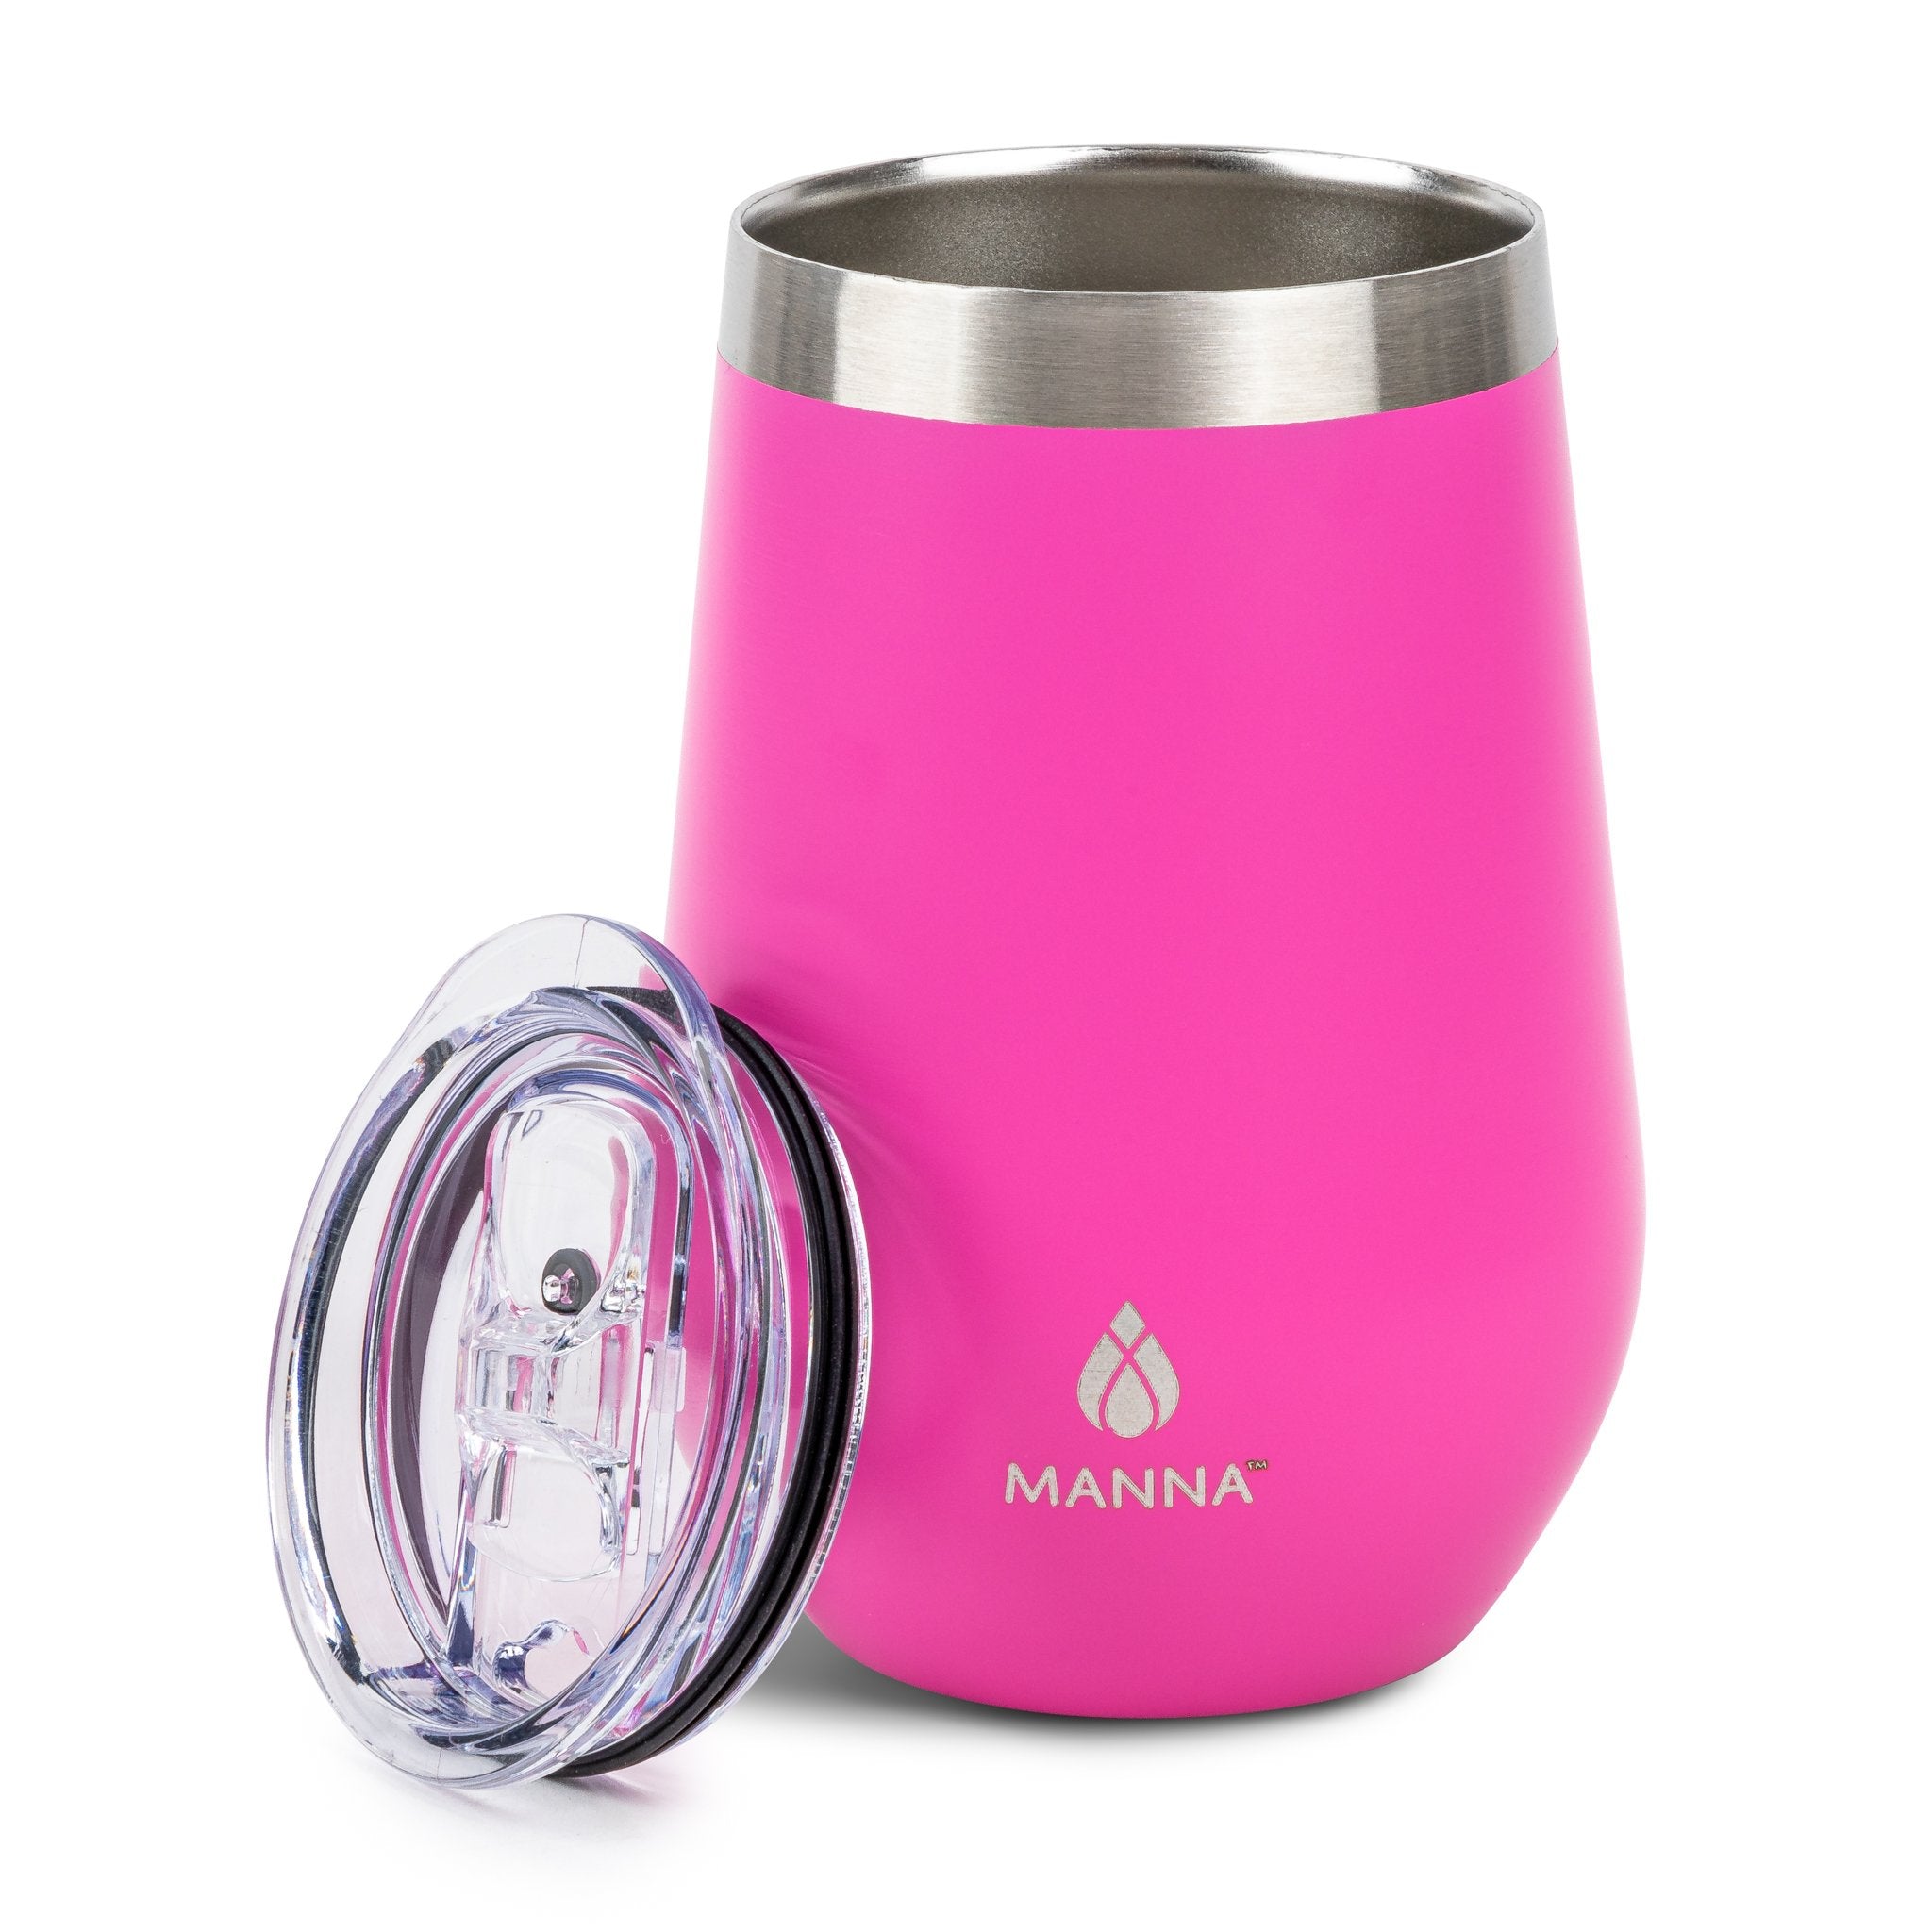 Complete Home Stainless Steel Insulated Wine Tumbler Pink